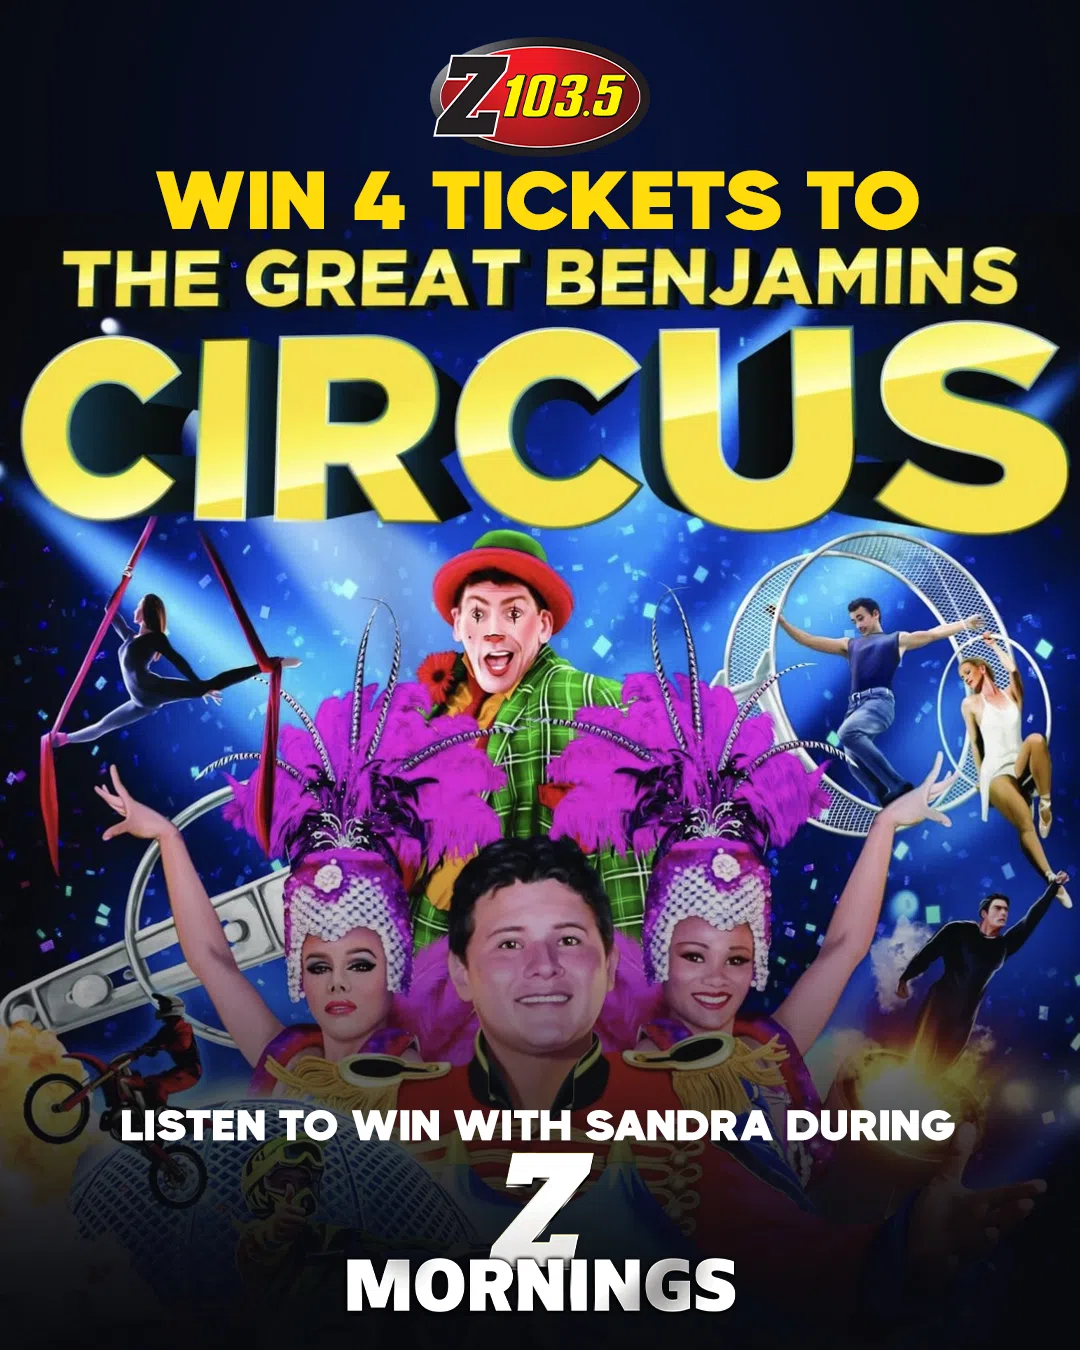 Feature: https://z1035.com/win/win-tickets-to-the-great-benjamin-circus/